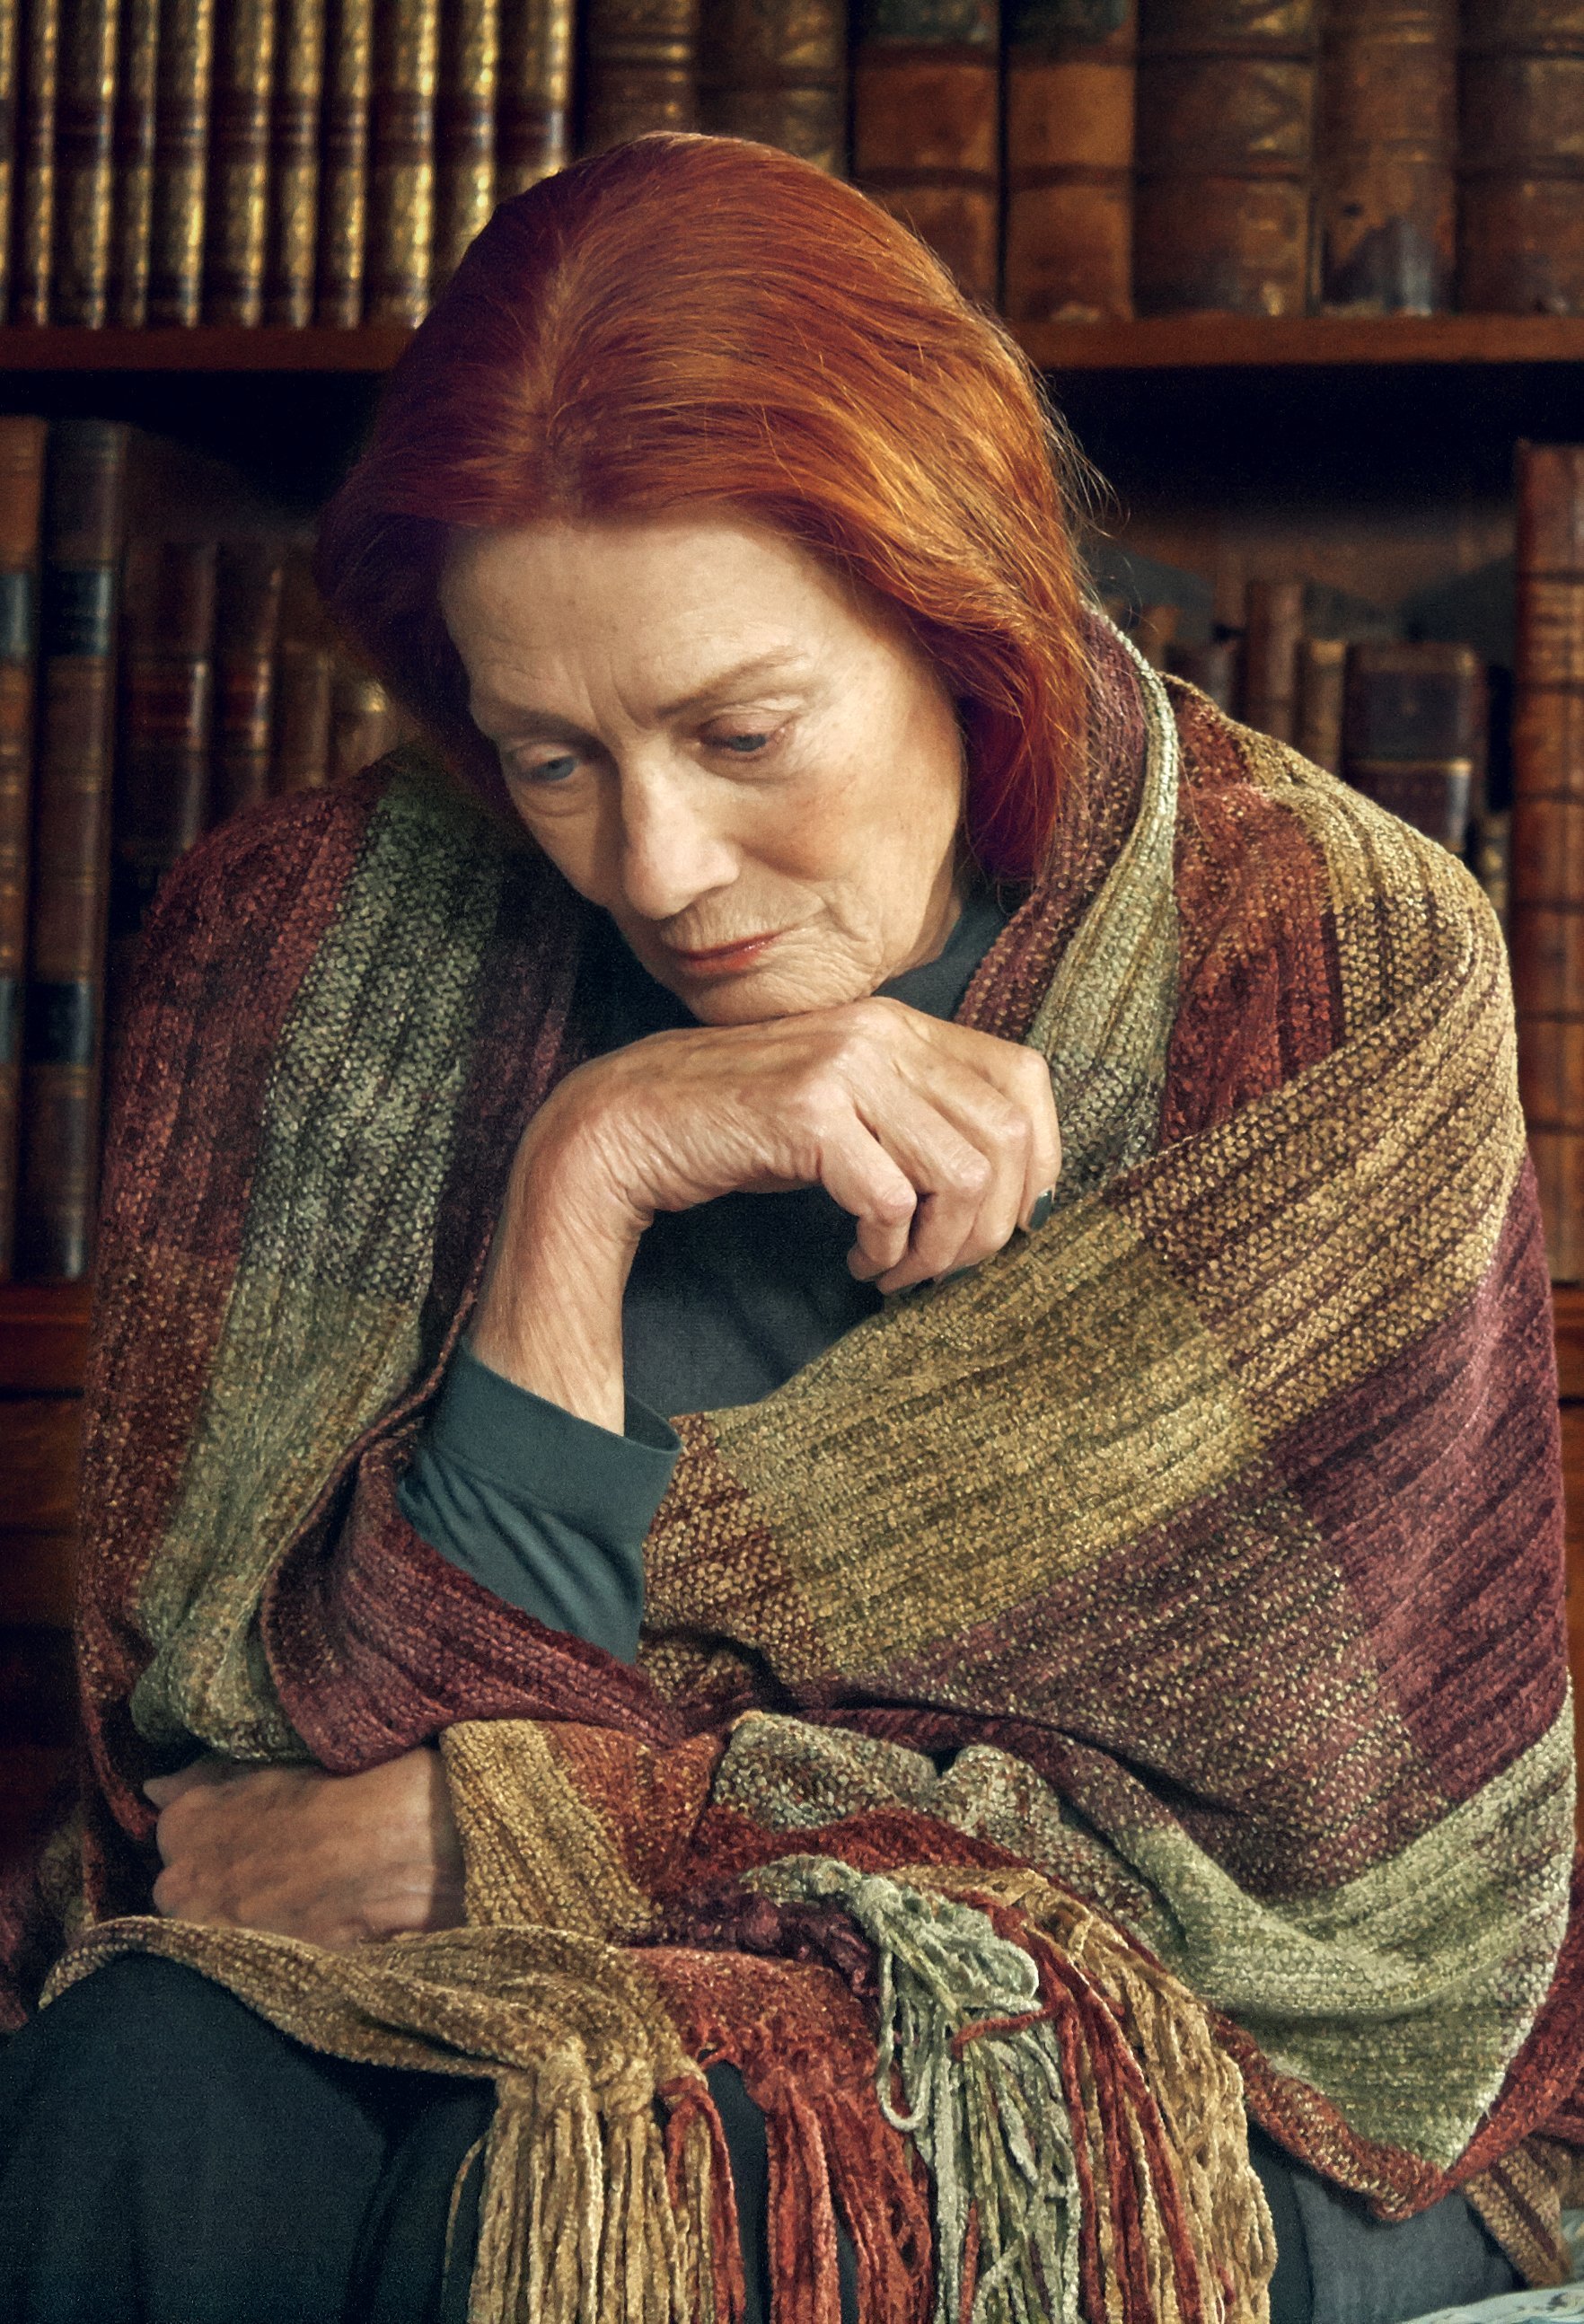 Vanessa Redgrave in The Thirteenth Tale (2013)